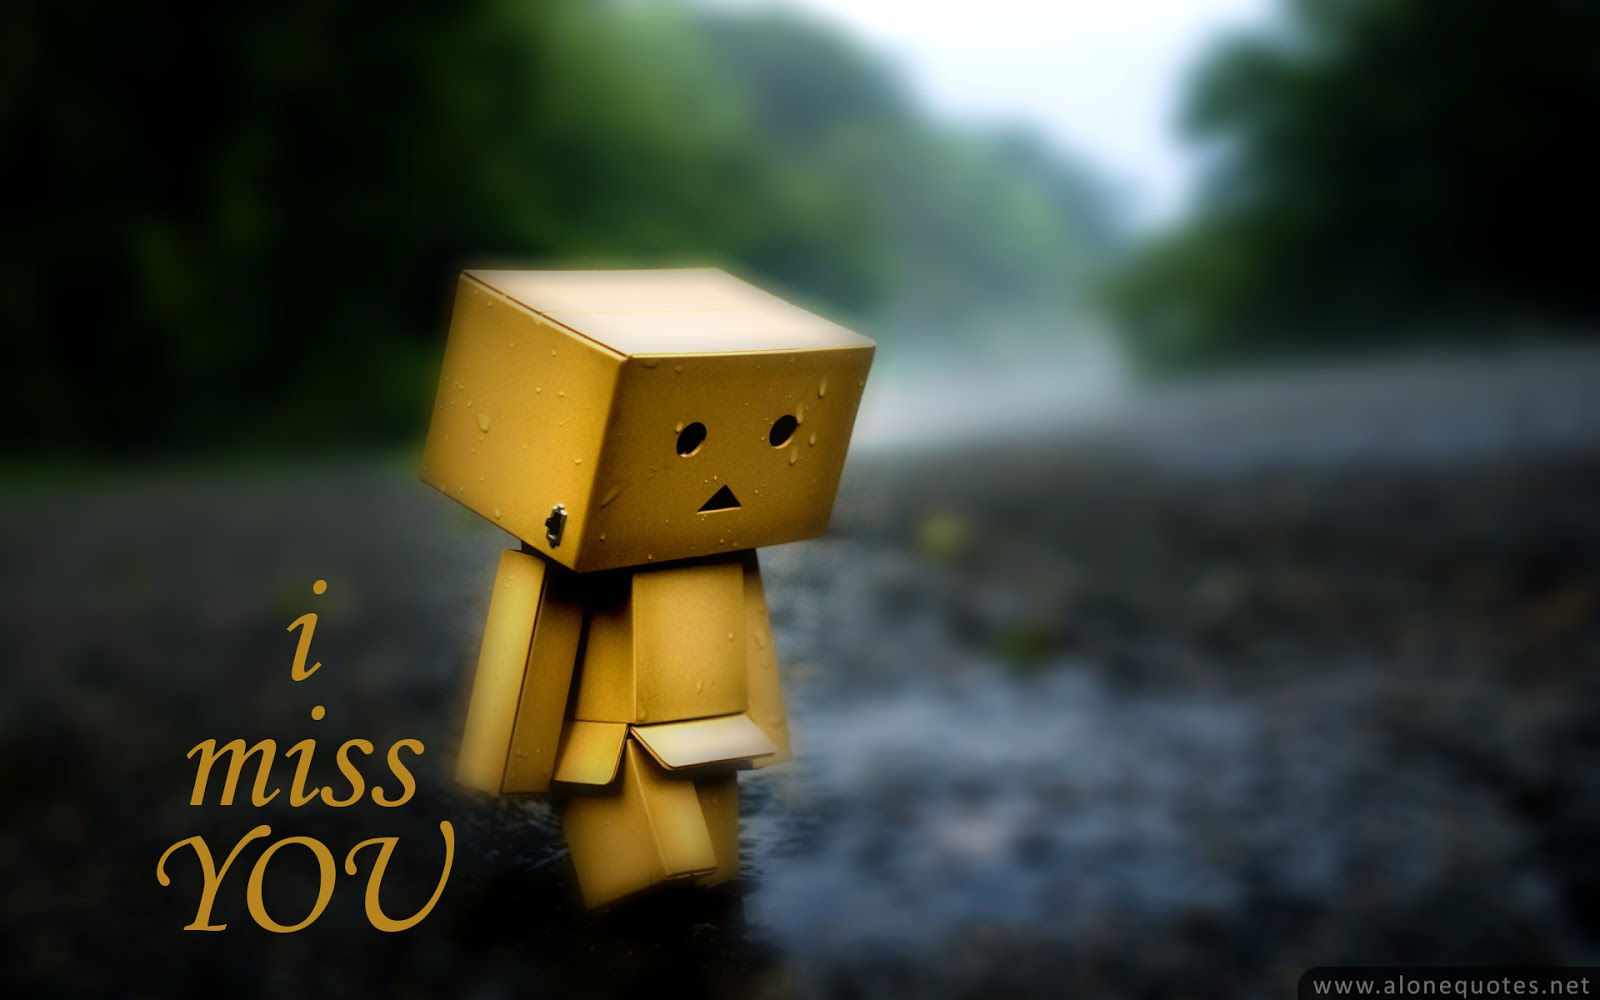 miss you hd wallpapers i miss you high quality wallpapers